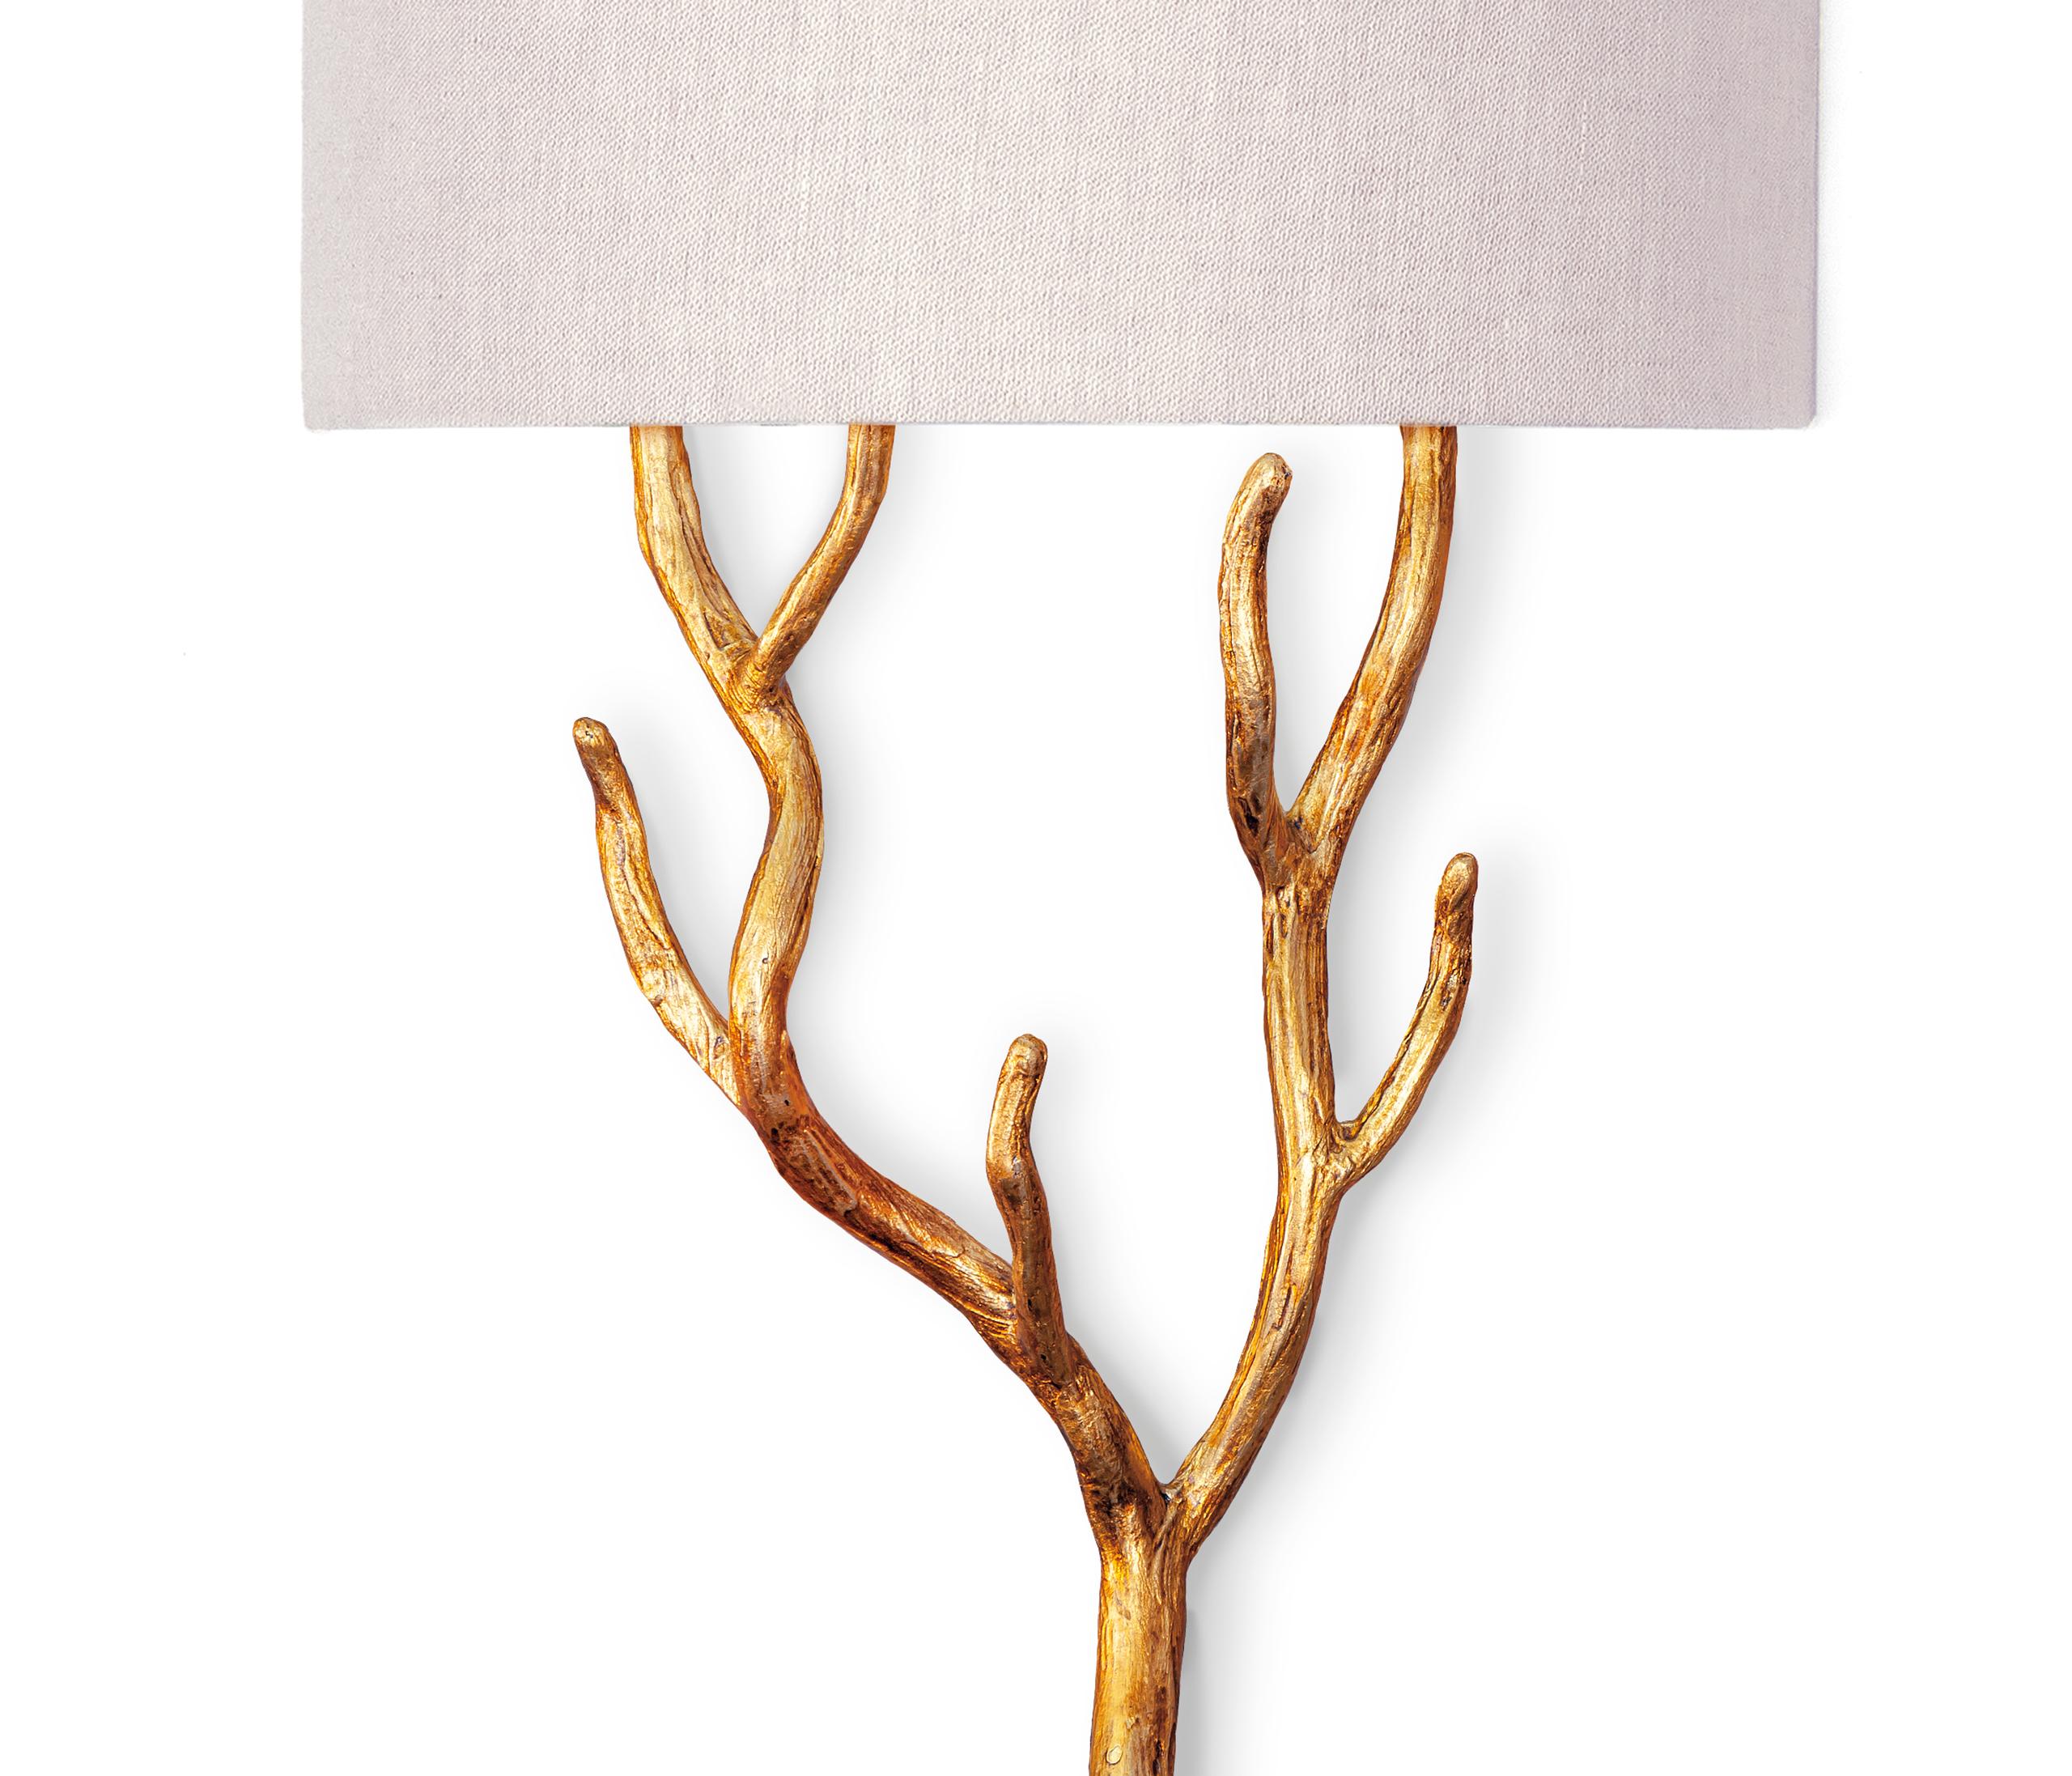 Organic forms and natural motifs. The Etna Wall Light  is individually hammered and hand formed. Each piece has been skillfully finished to resemble the texture of tree bark. Available in Antique Gold or Forest Brown Finish.  Alternative finishes